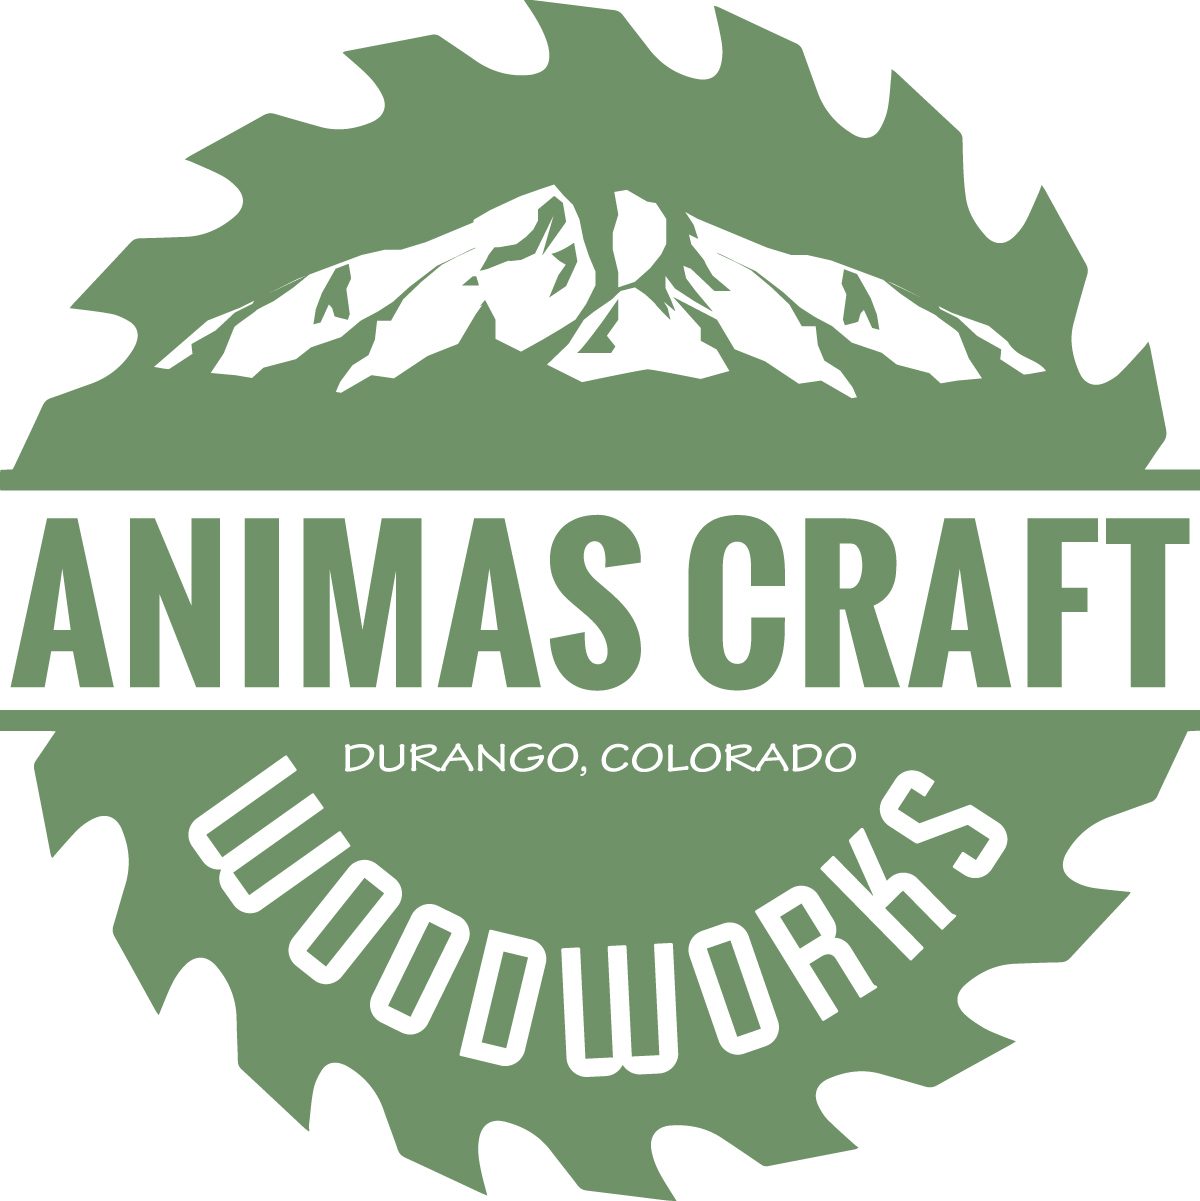 animas-craft-woodworks-durango-sustainable-business-guide/